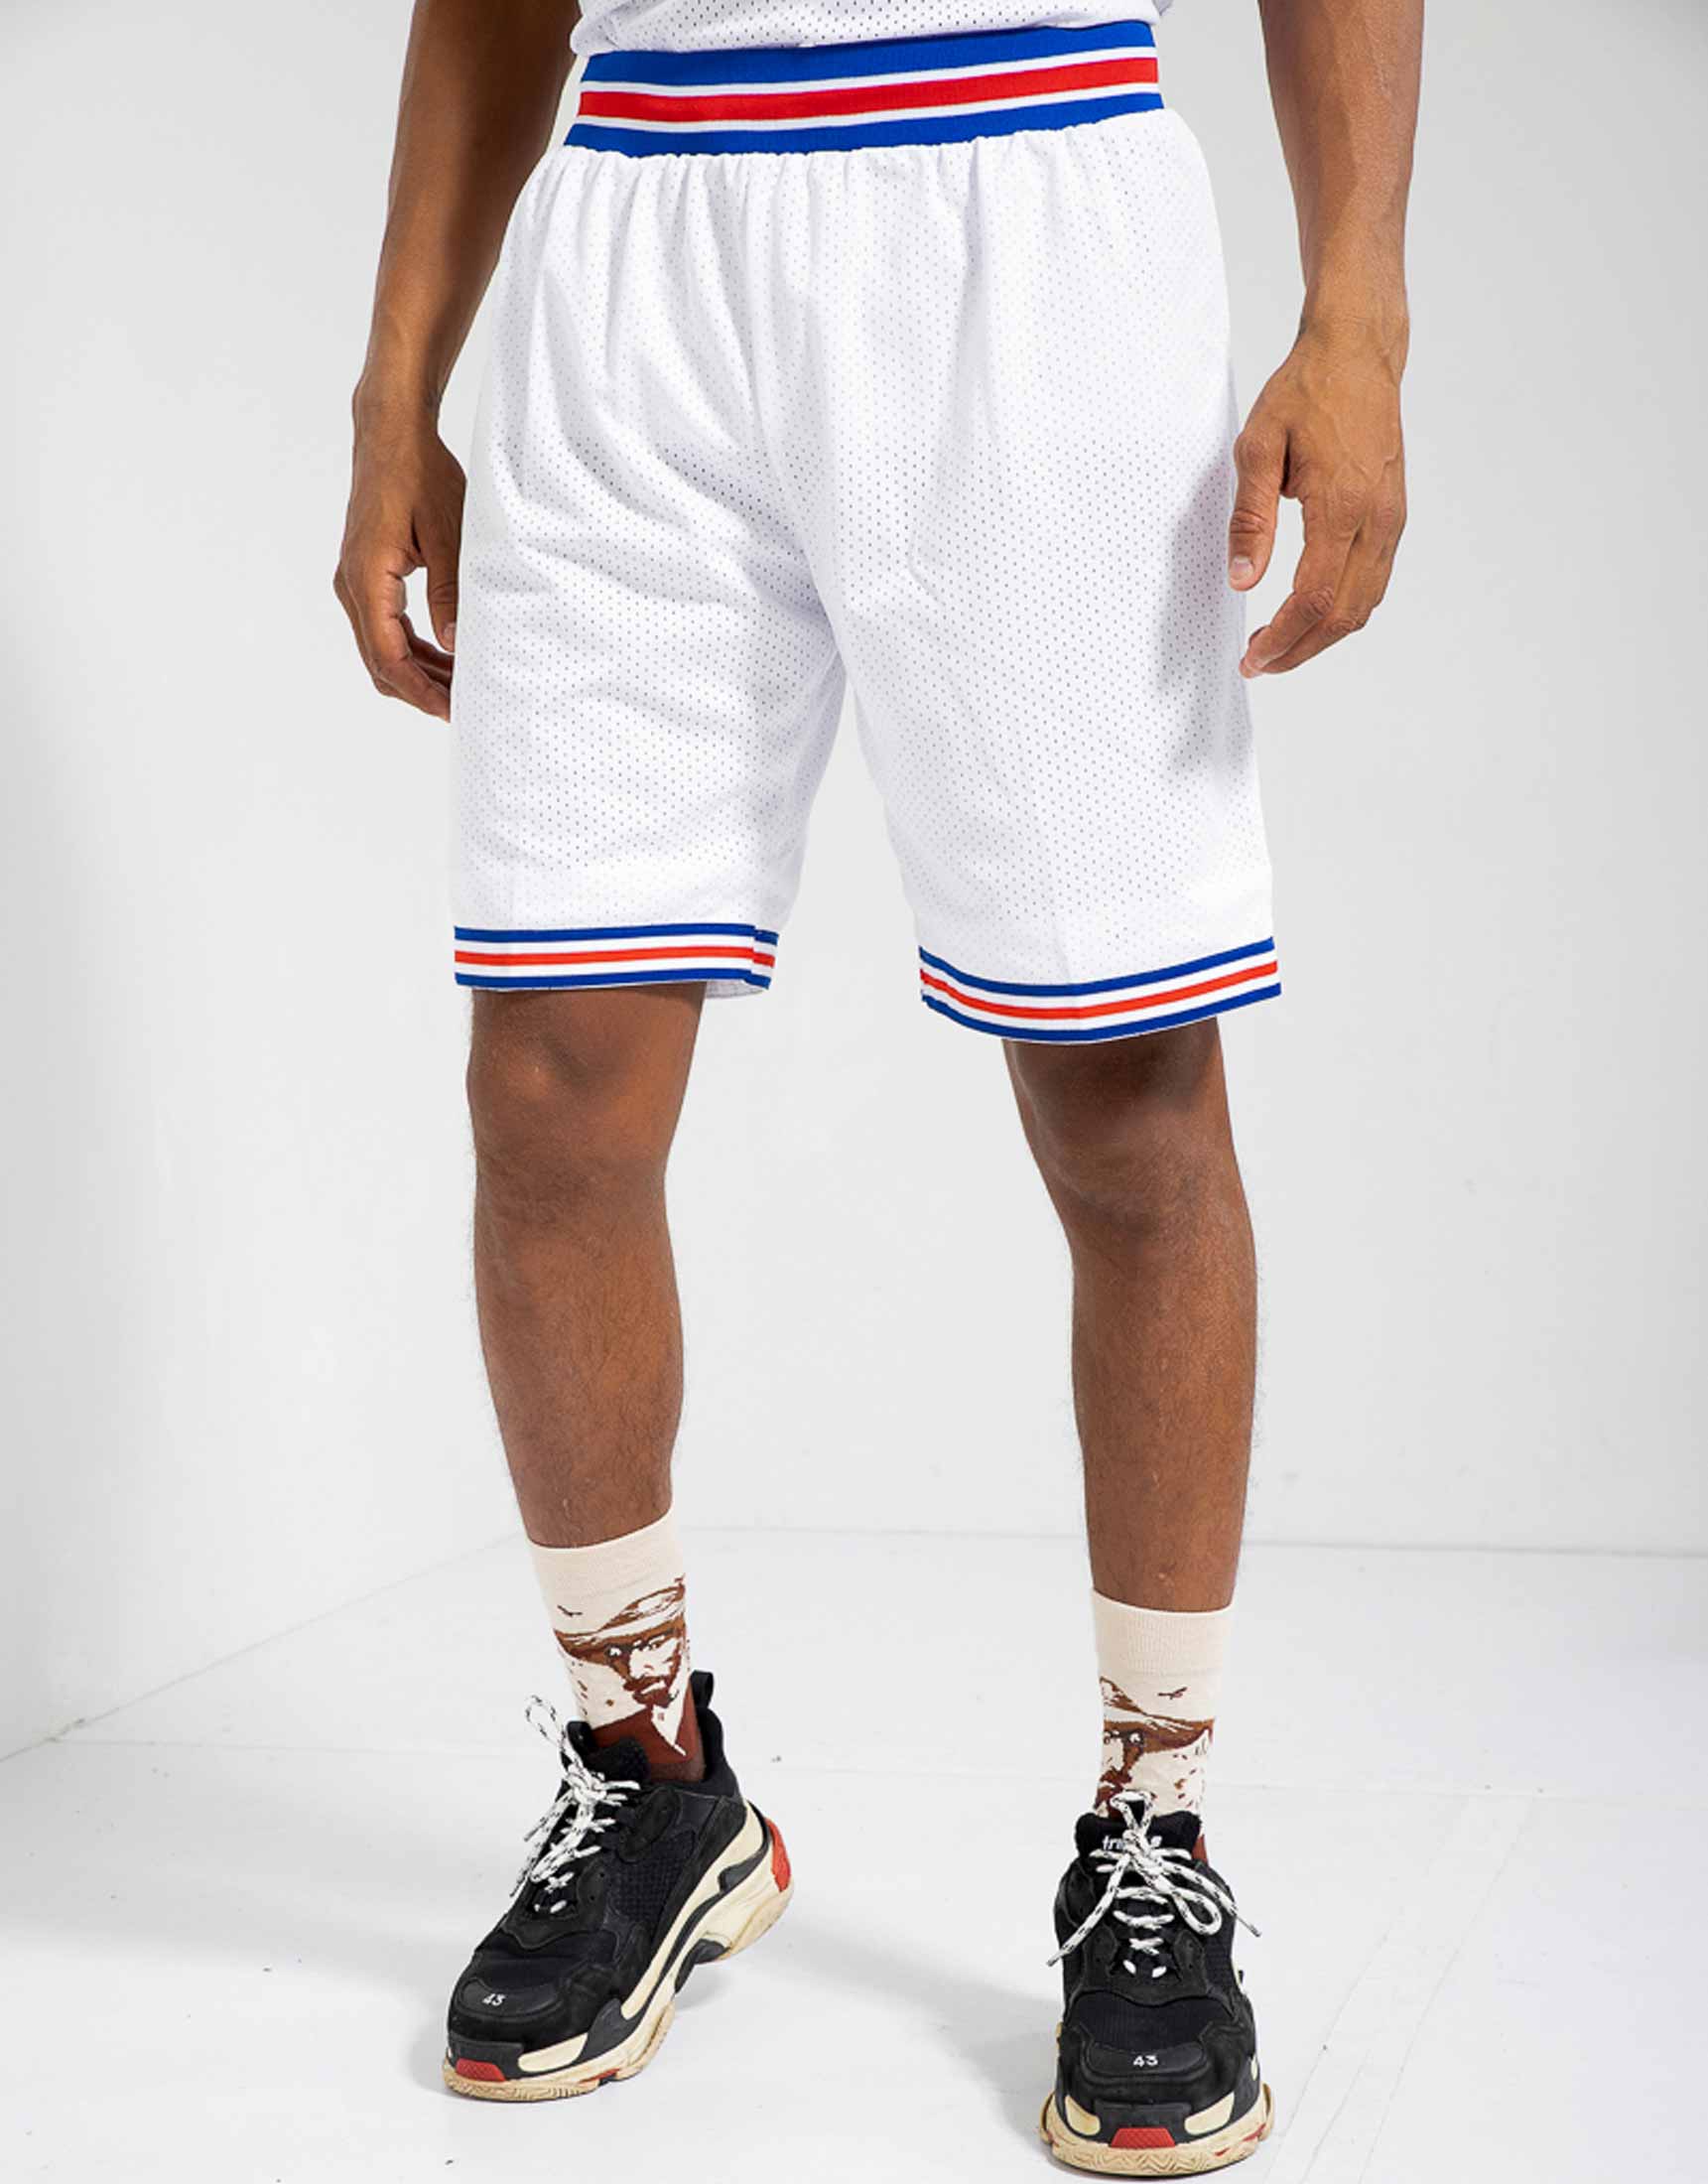 Space Jam Looney Tunes Tune Squad Basketball Shorts L